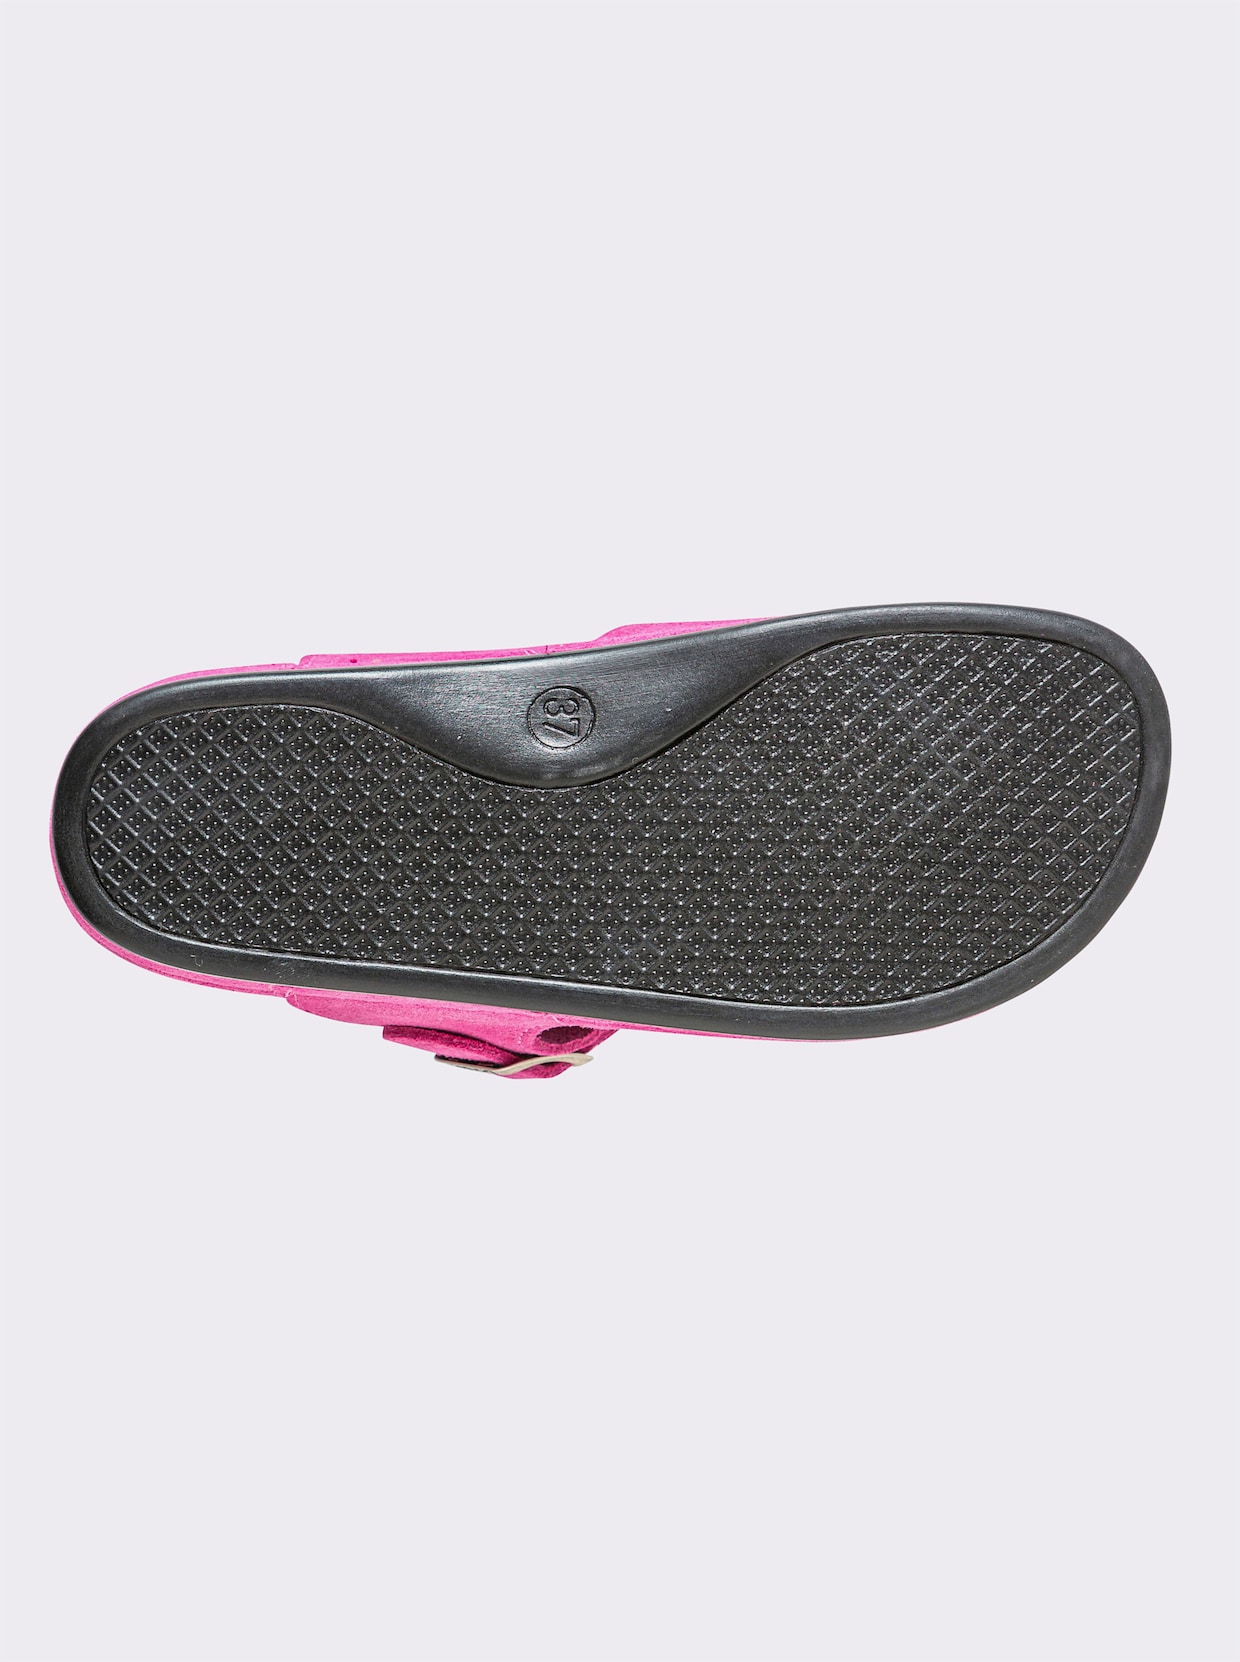 Dr. Feet Slippers - pink